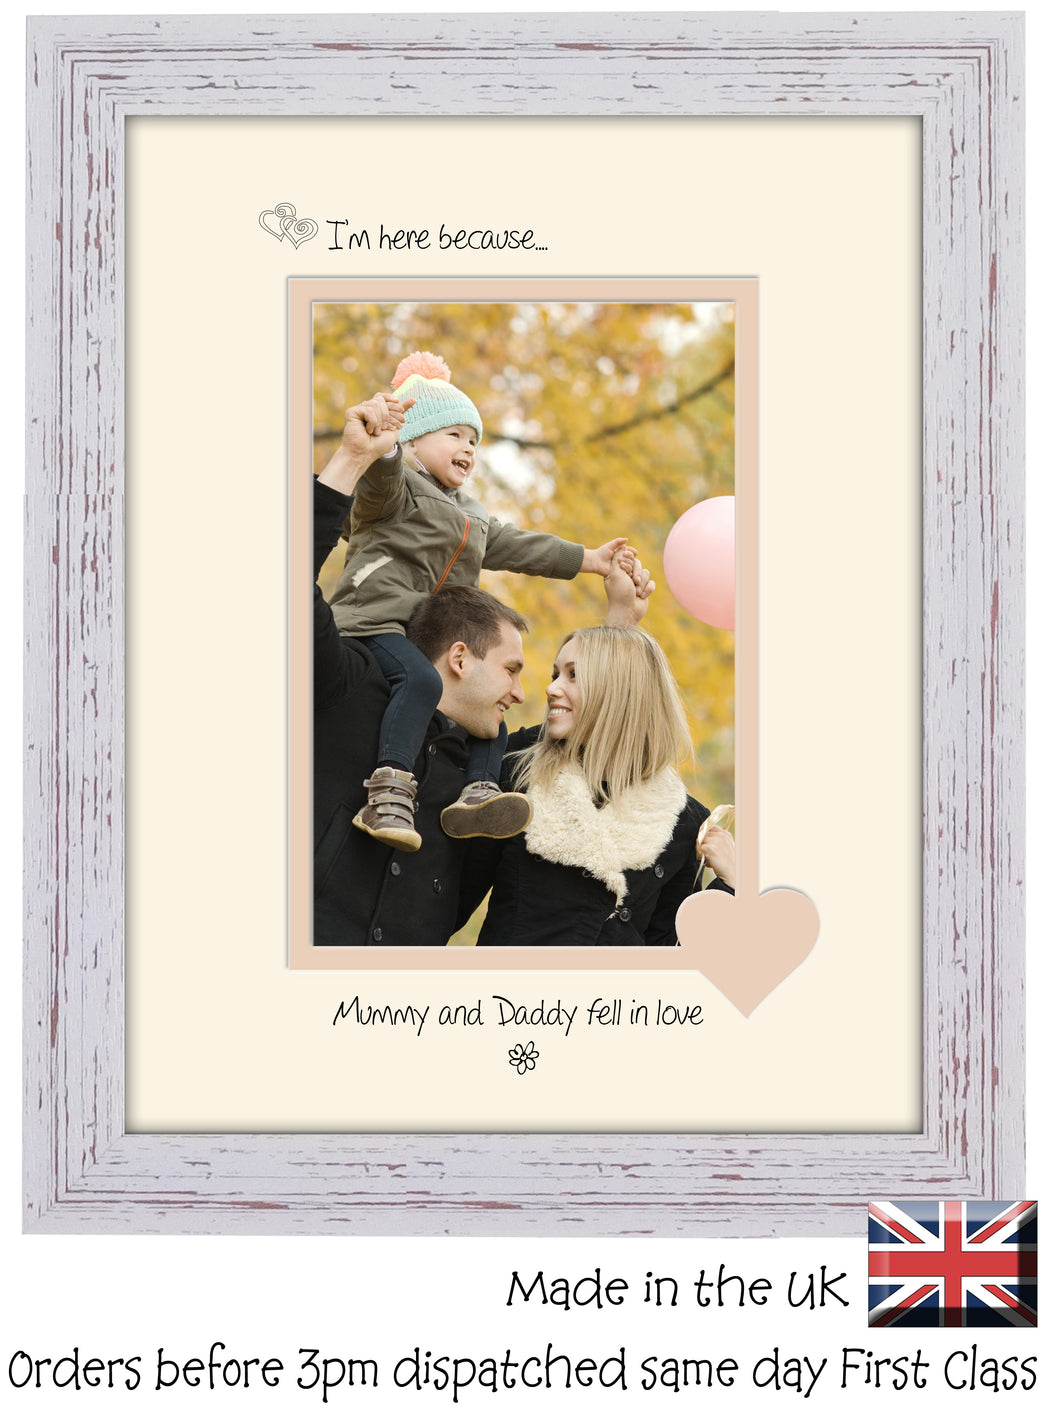 Mummy & Daddy Photo Frame - I'm here because… Mummy and Daddy fell in love Portrait photo frame 6